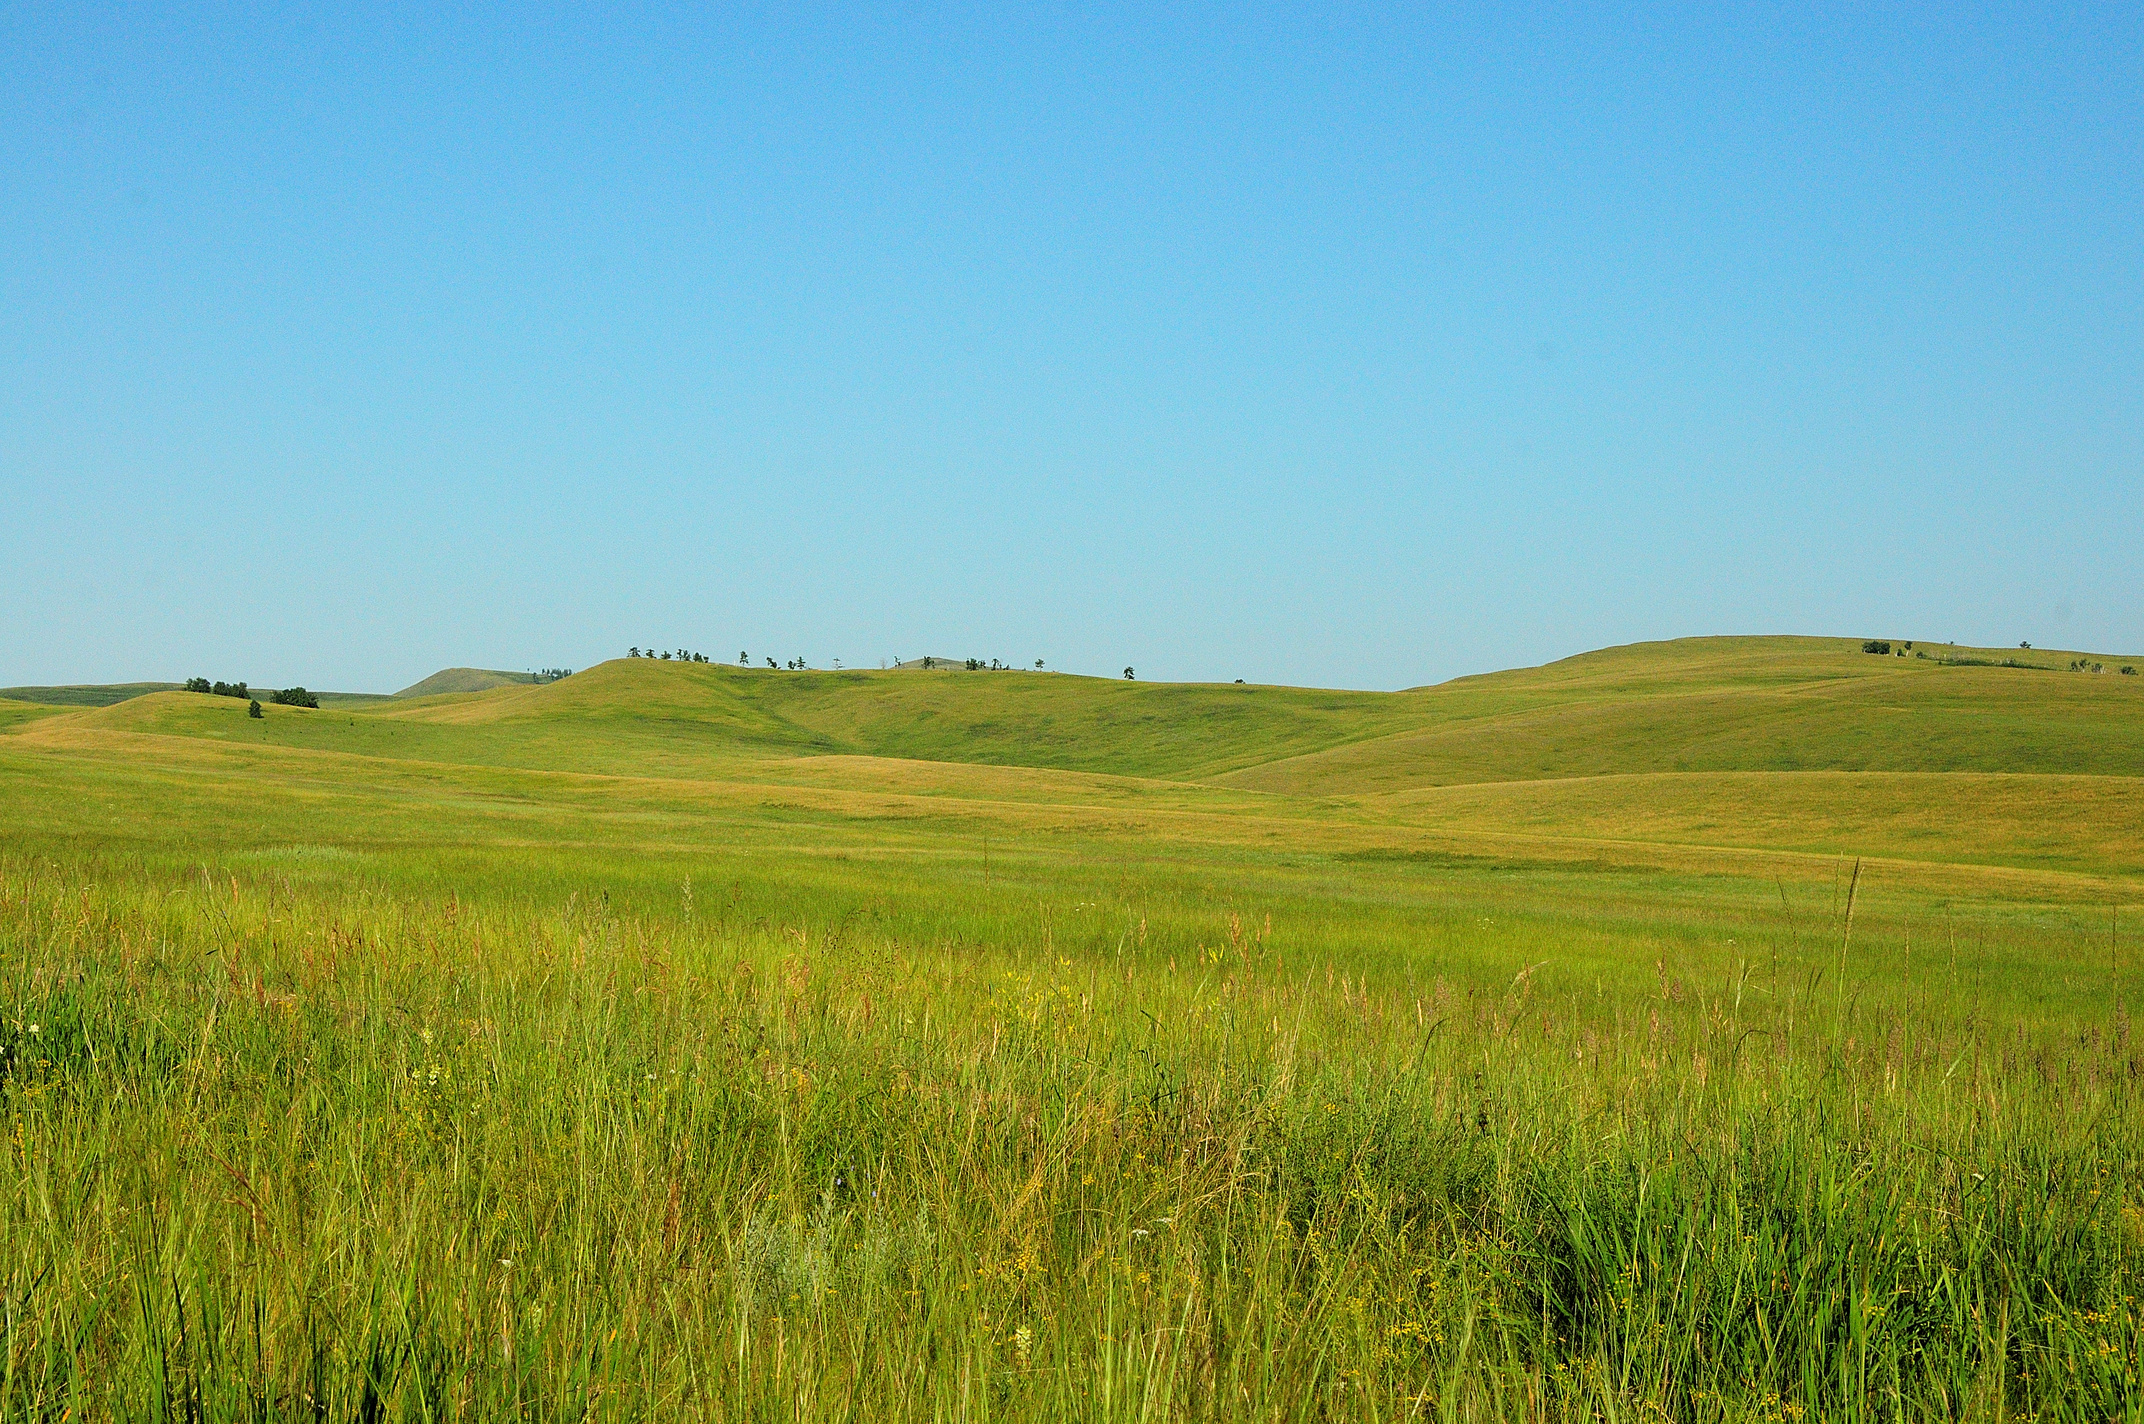 Endless hilly steppes overgrown with tall grass under a blue sky on a clear sunny day.